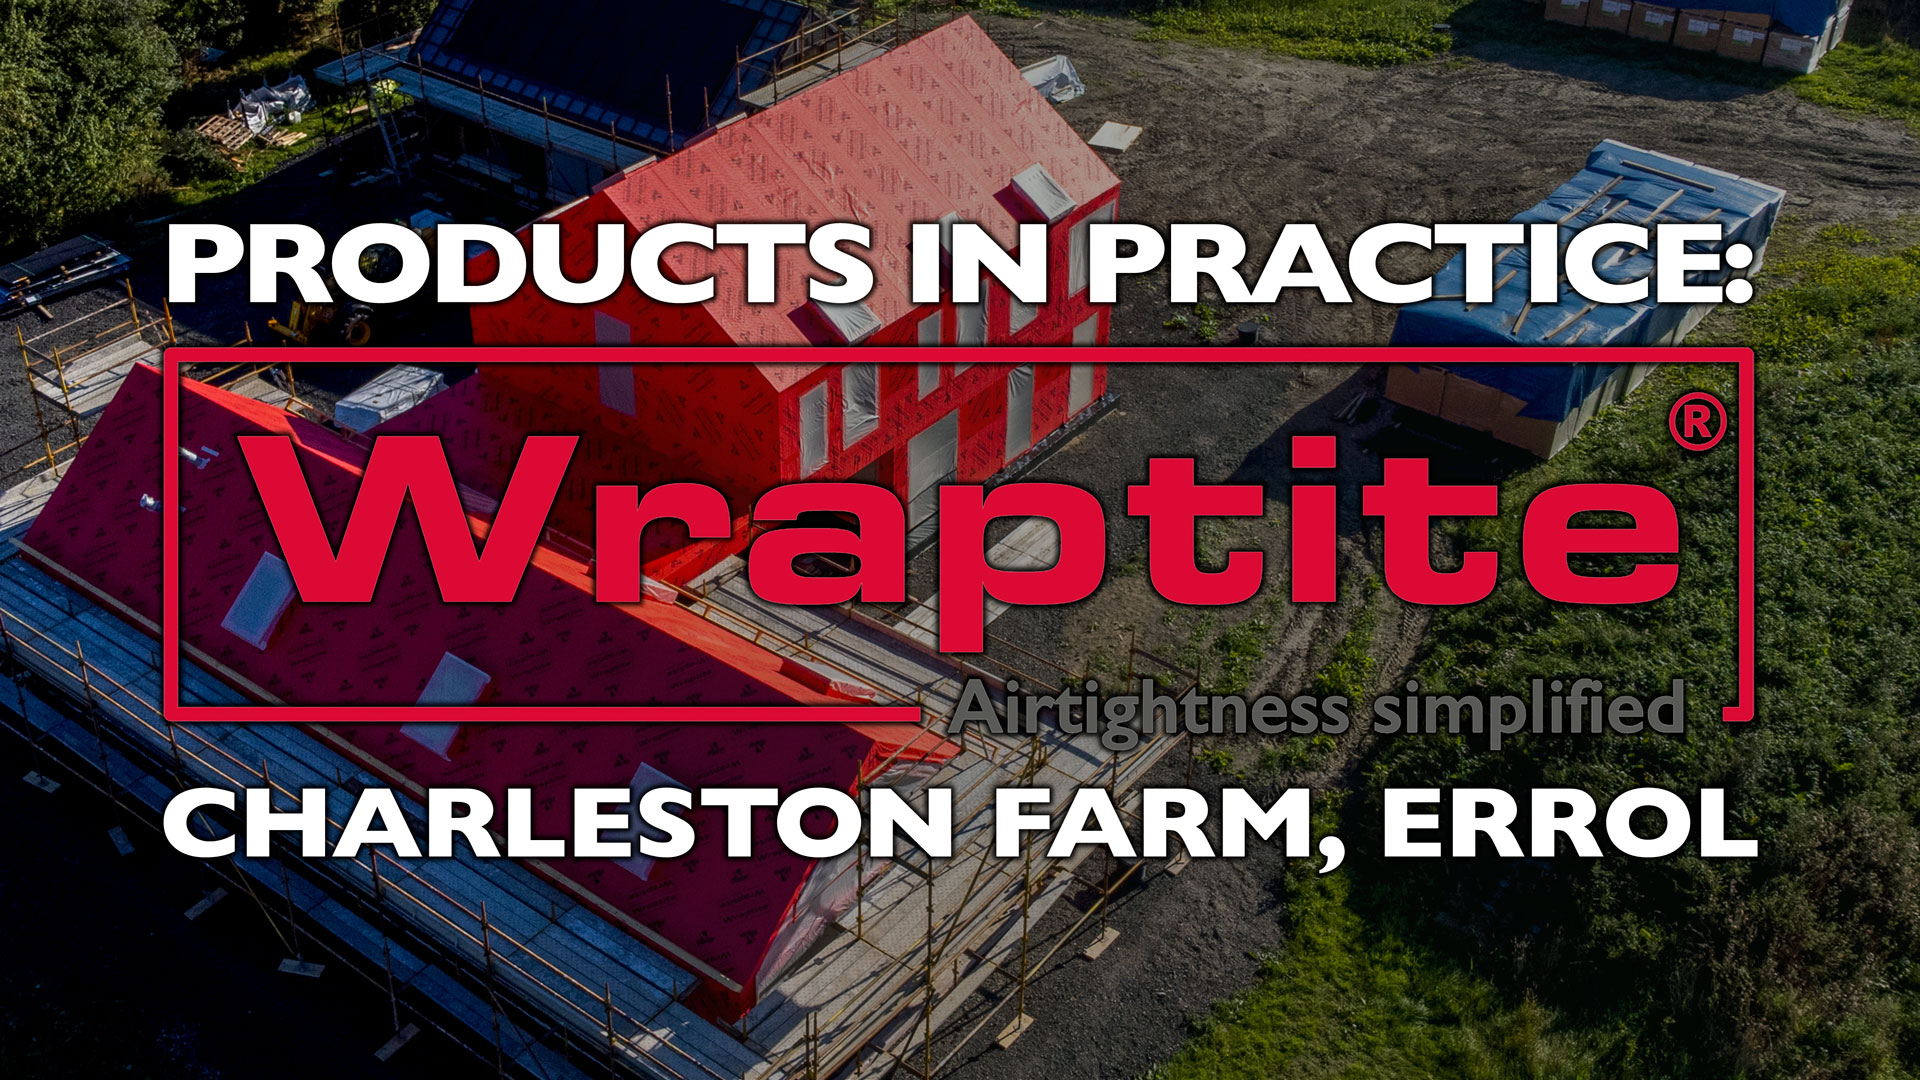 Welcome to our webinar, "Wraptite, Charleston Farm, Errol". In this webinar Architect Frances Strachan-Friar presents an overview of her self build project from planning to construction, and details the fully "hands on" approach taken to the build.